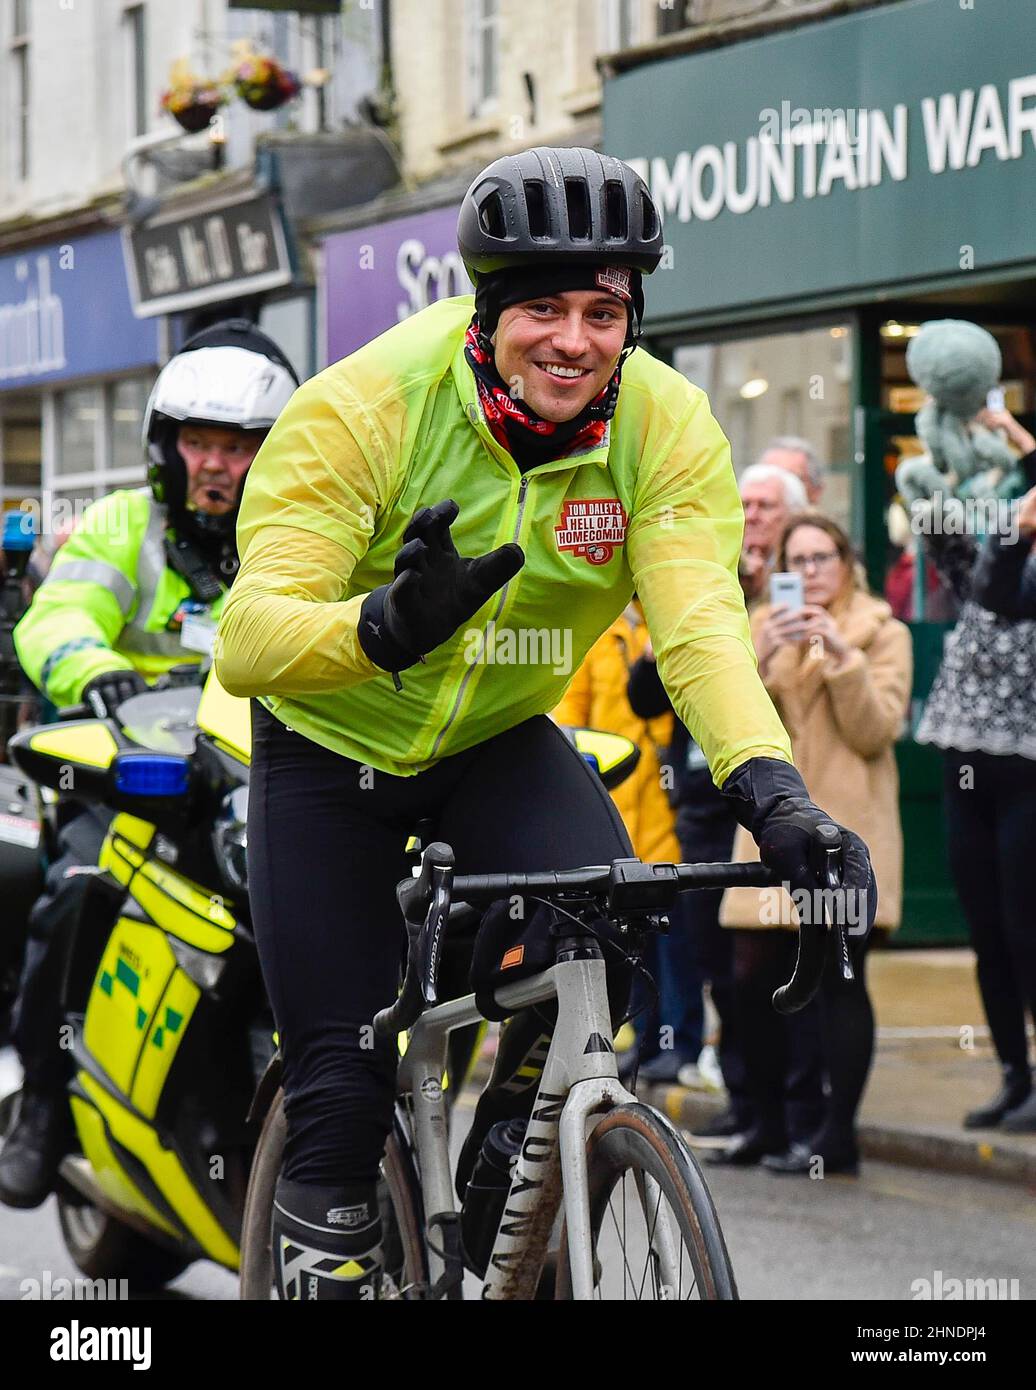 Bridport, Dorset, UK.  16th February 2022.  Olympic gold medalists Tom Daley OBE is cheered on by people lining the street as he rides through Bridport in Dorset on day 3 of his Comic Relief Hell of a Homecoming challenge from the Queen Elizabeth Olympic Park in Stratford to his hometown of Plymouth in Devon.  On this leg he is cycling 130 miles from Southampton to Bovey Castle on Dartmoor in Devon.  Picture Credit: Graham Hunt/Alamy Live News Stock Photo